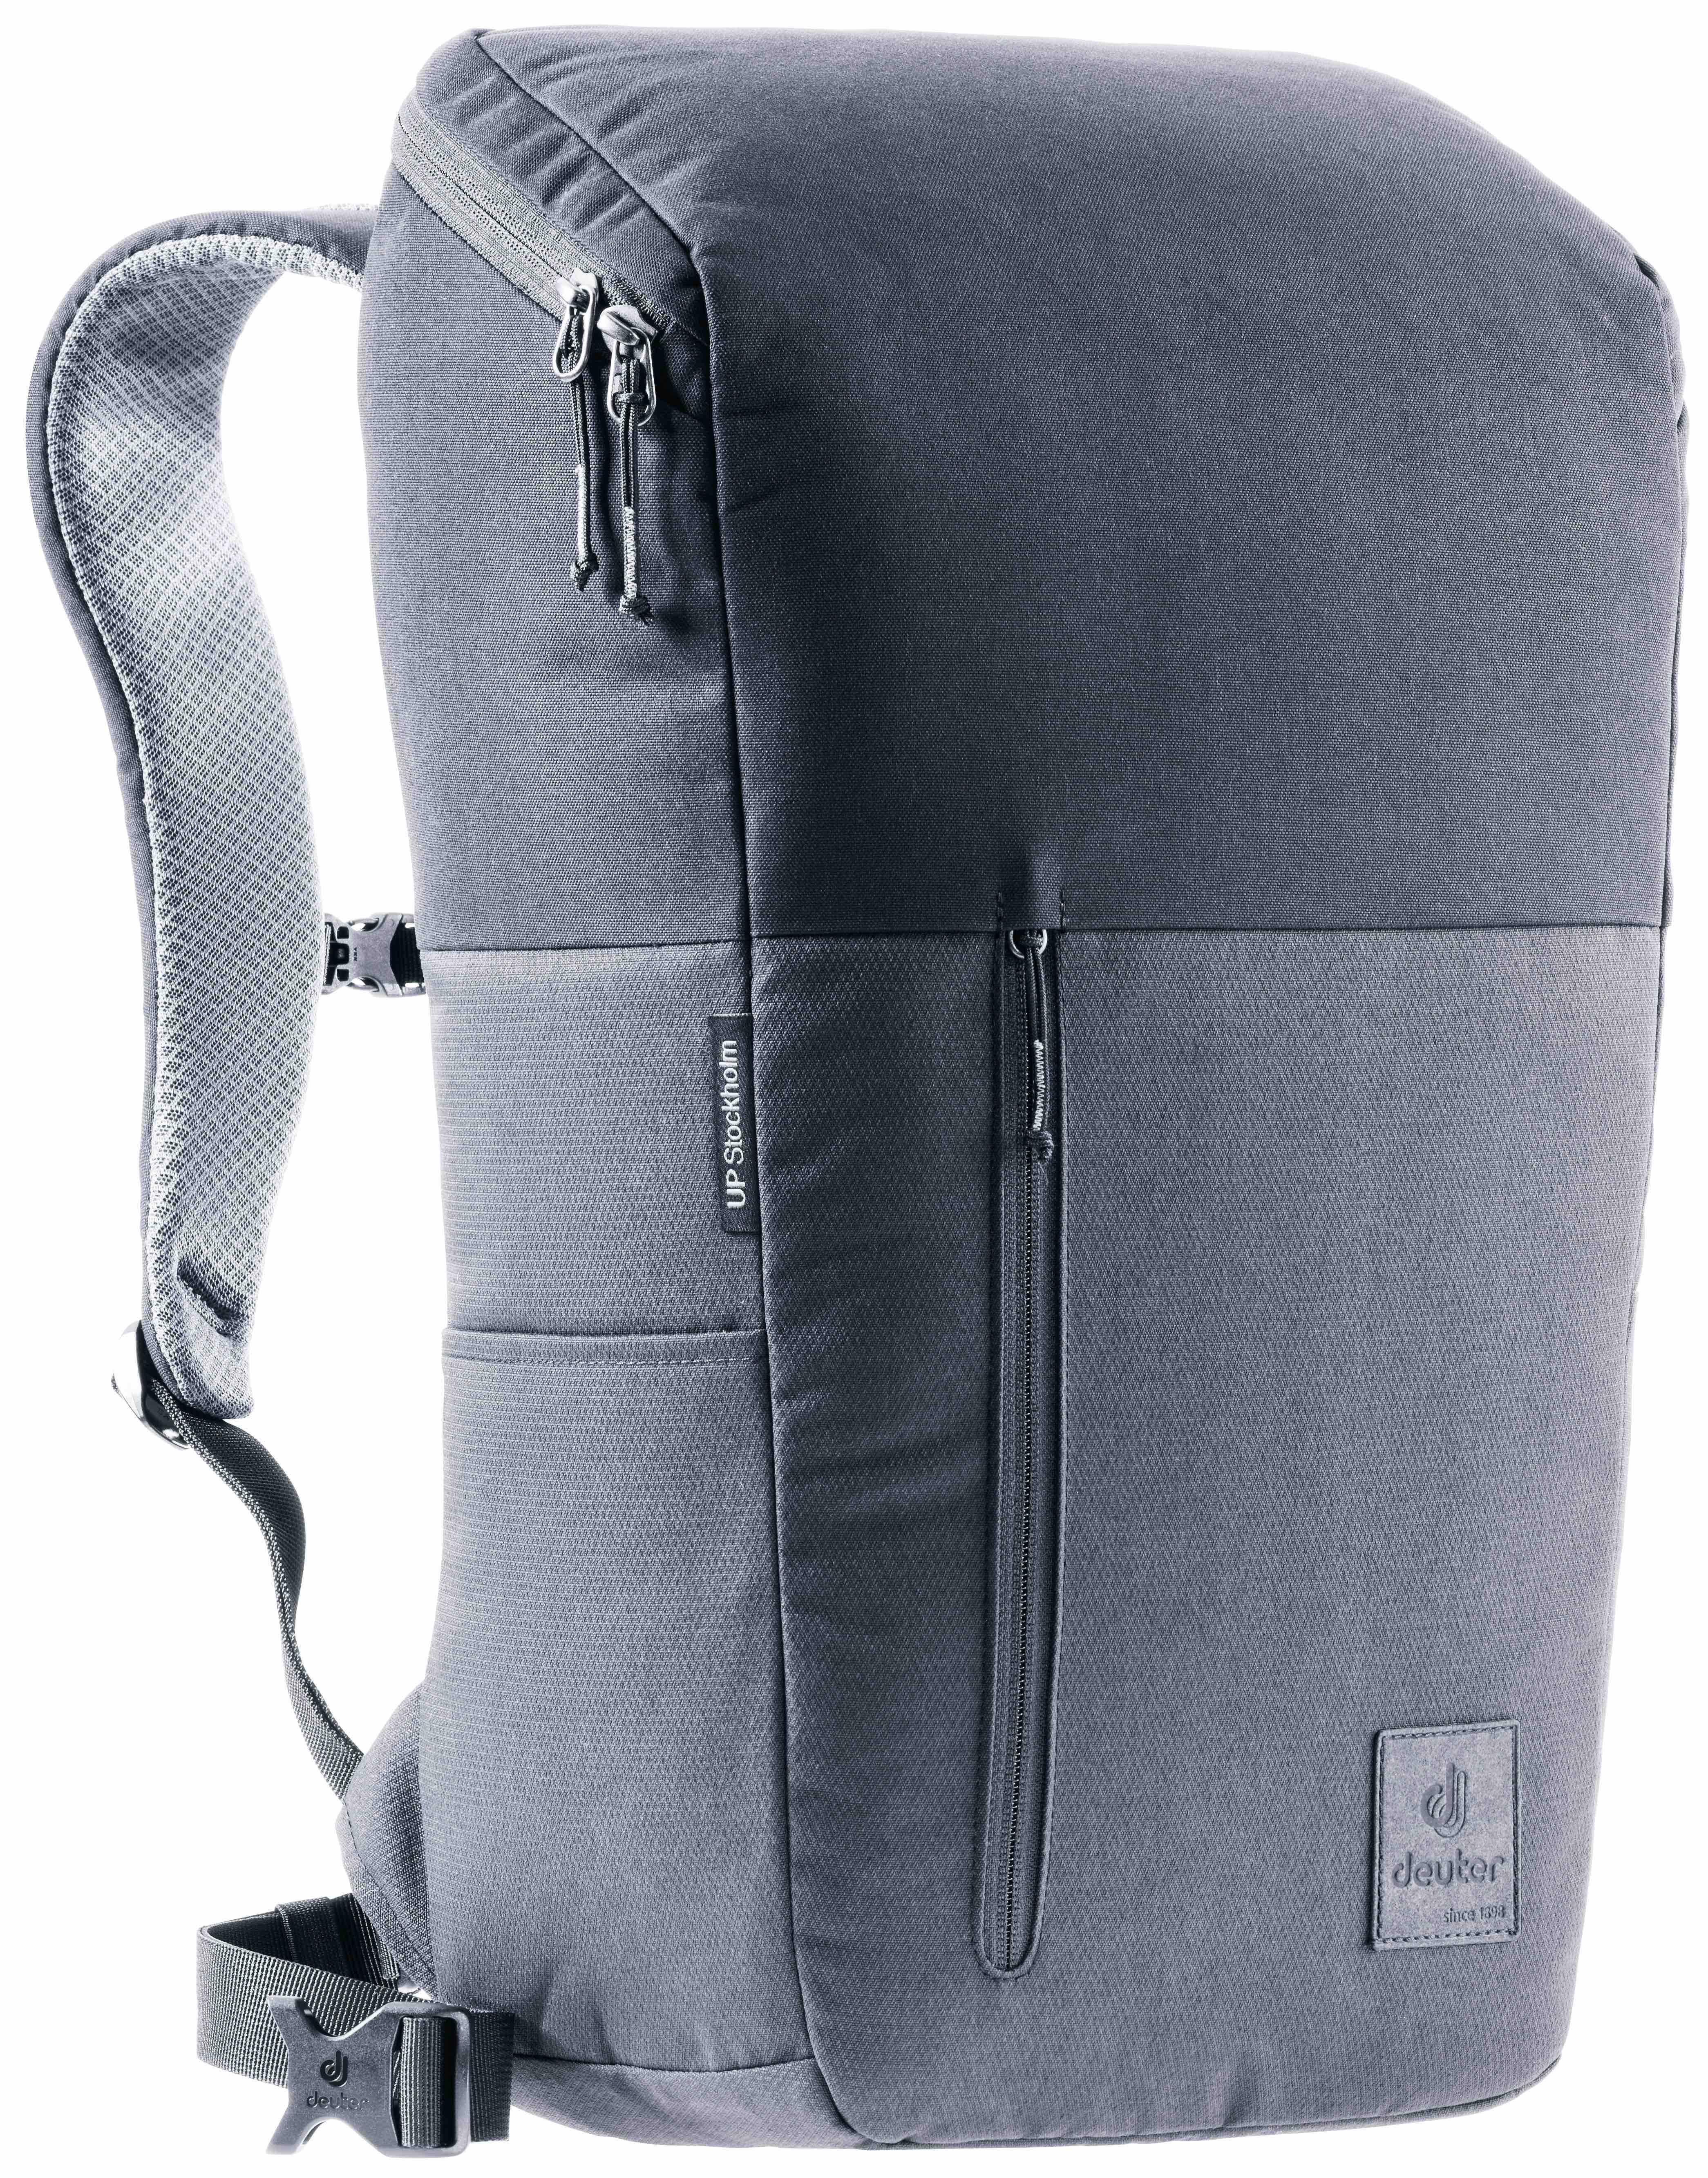 All-New Deuter UP Series